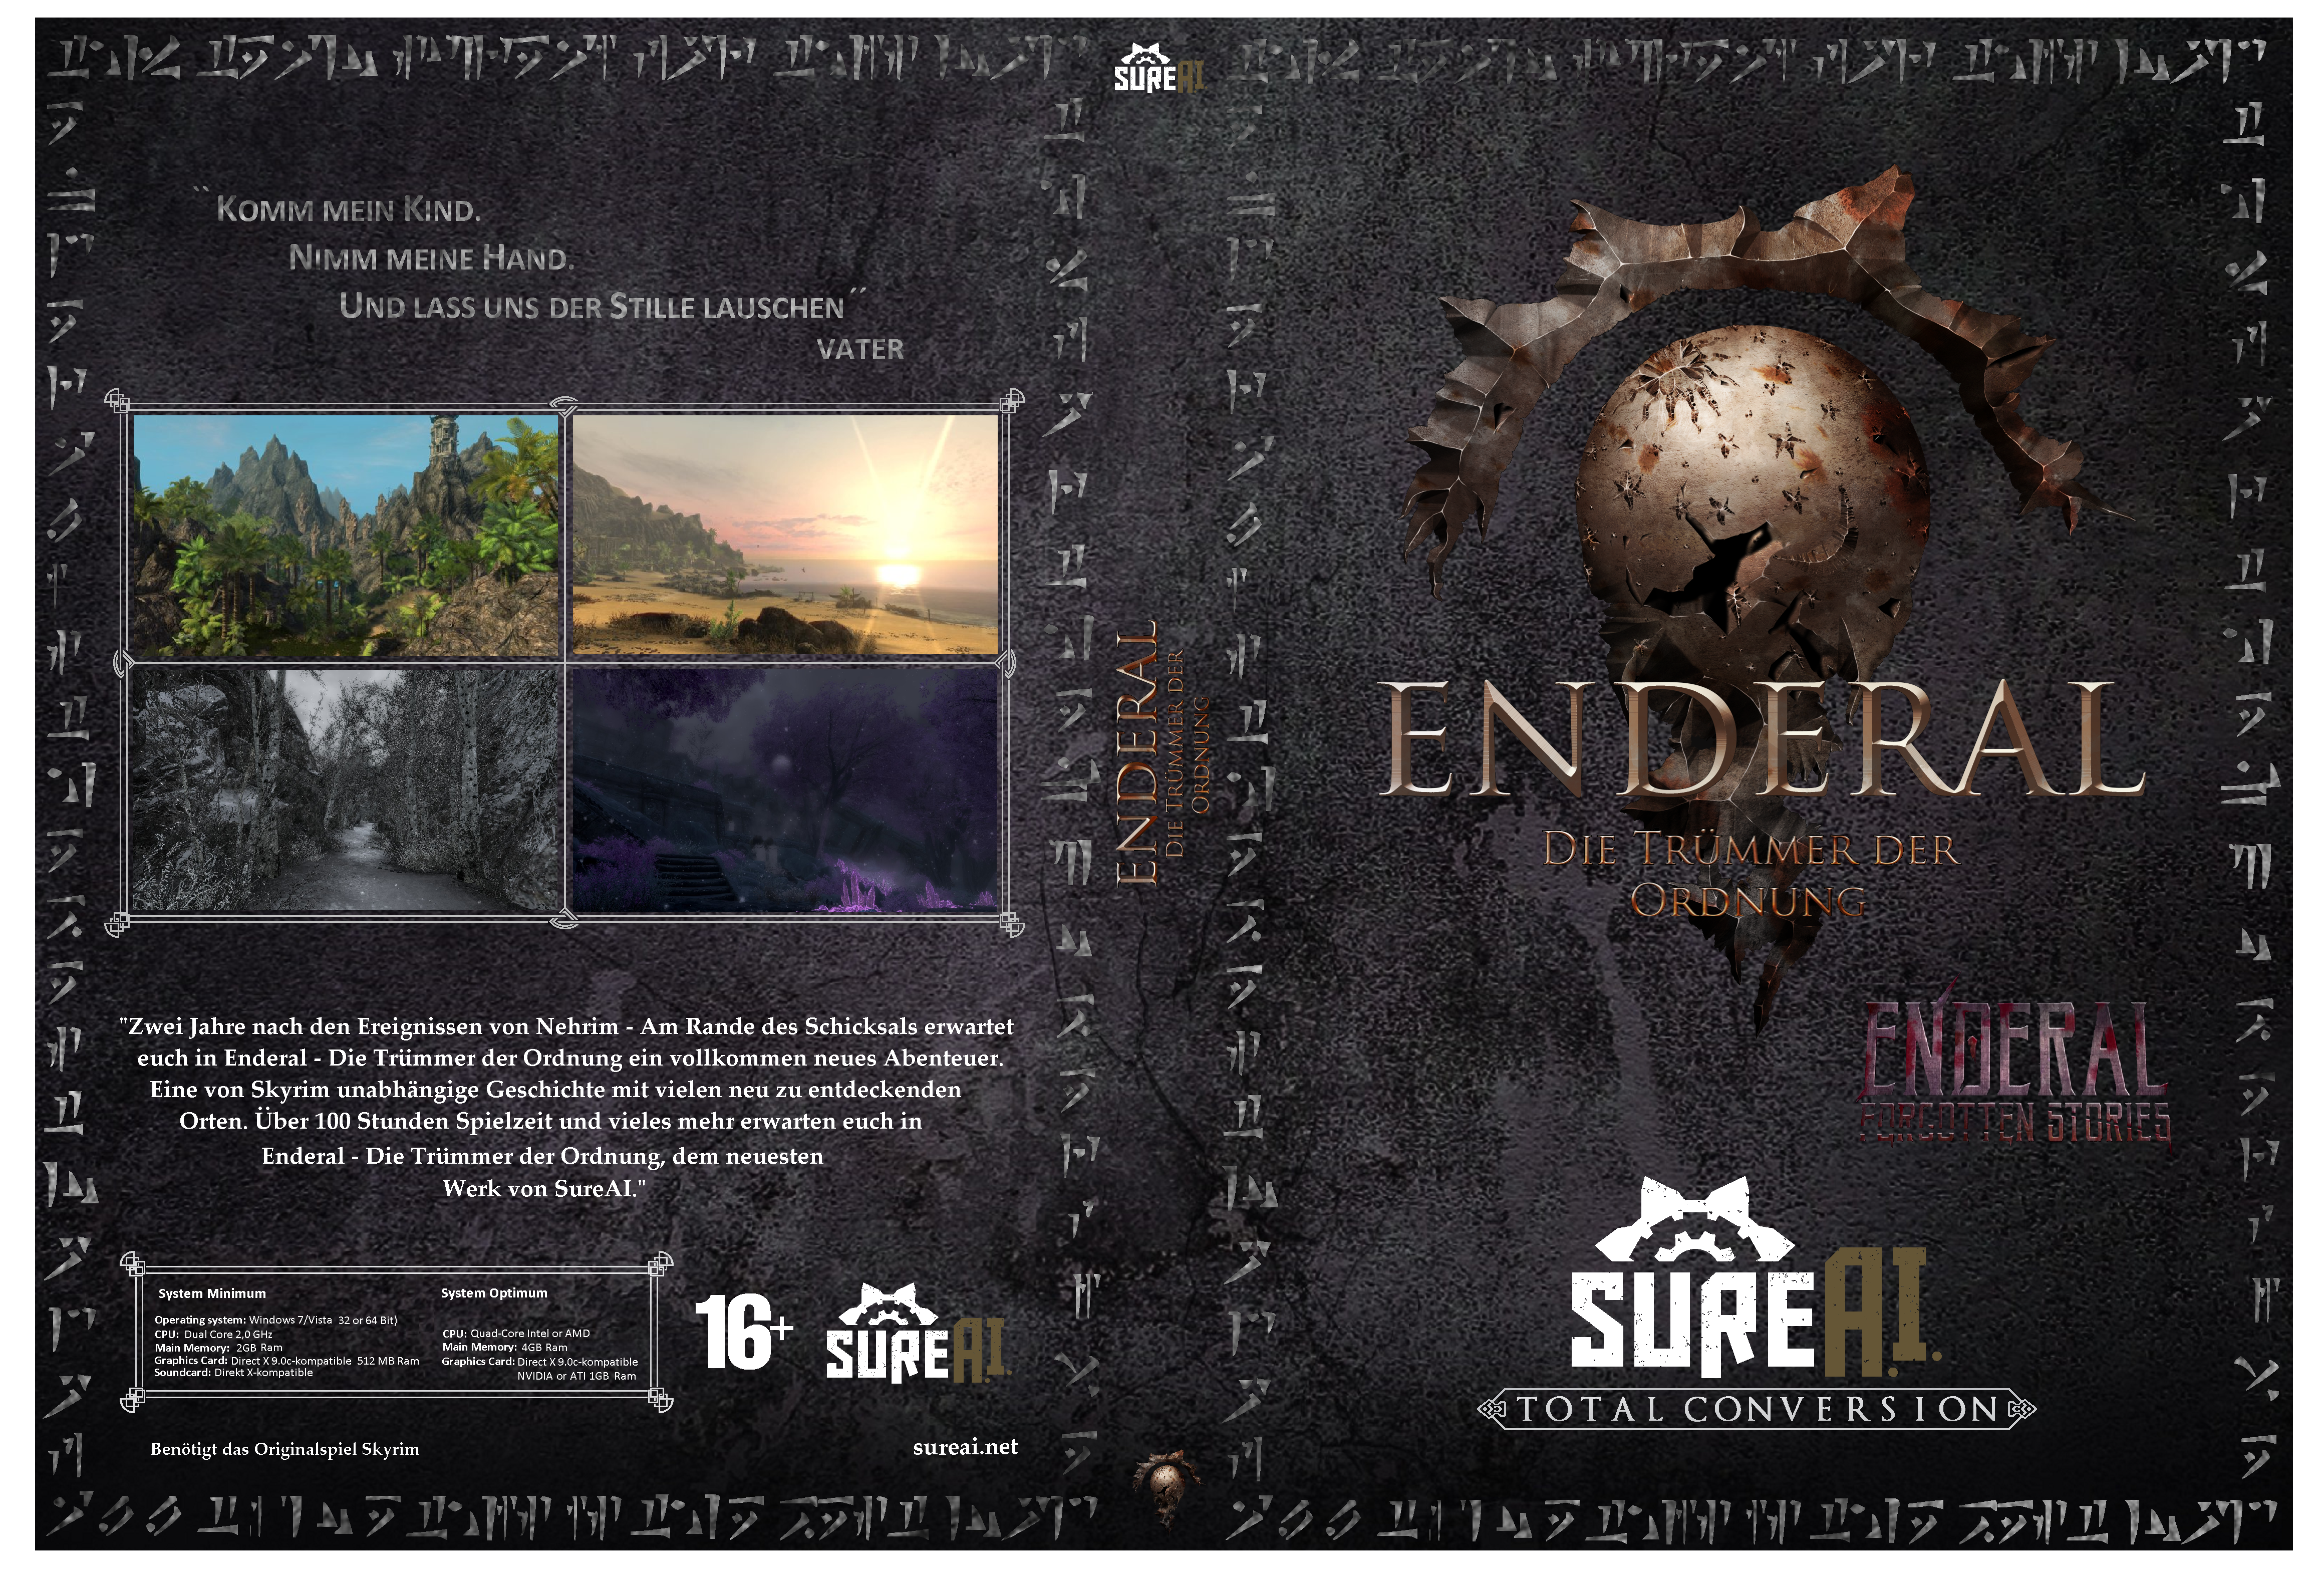 Enderal mit DLC Cover.png